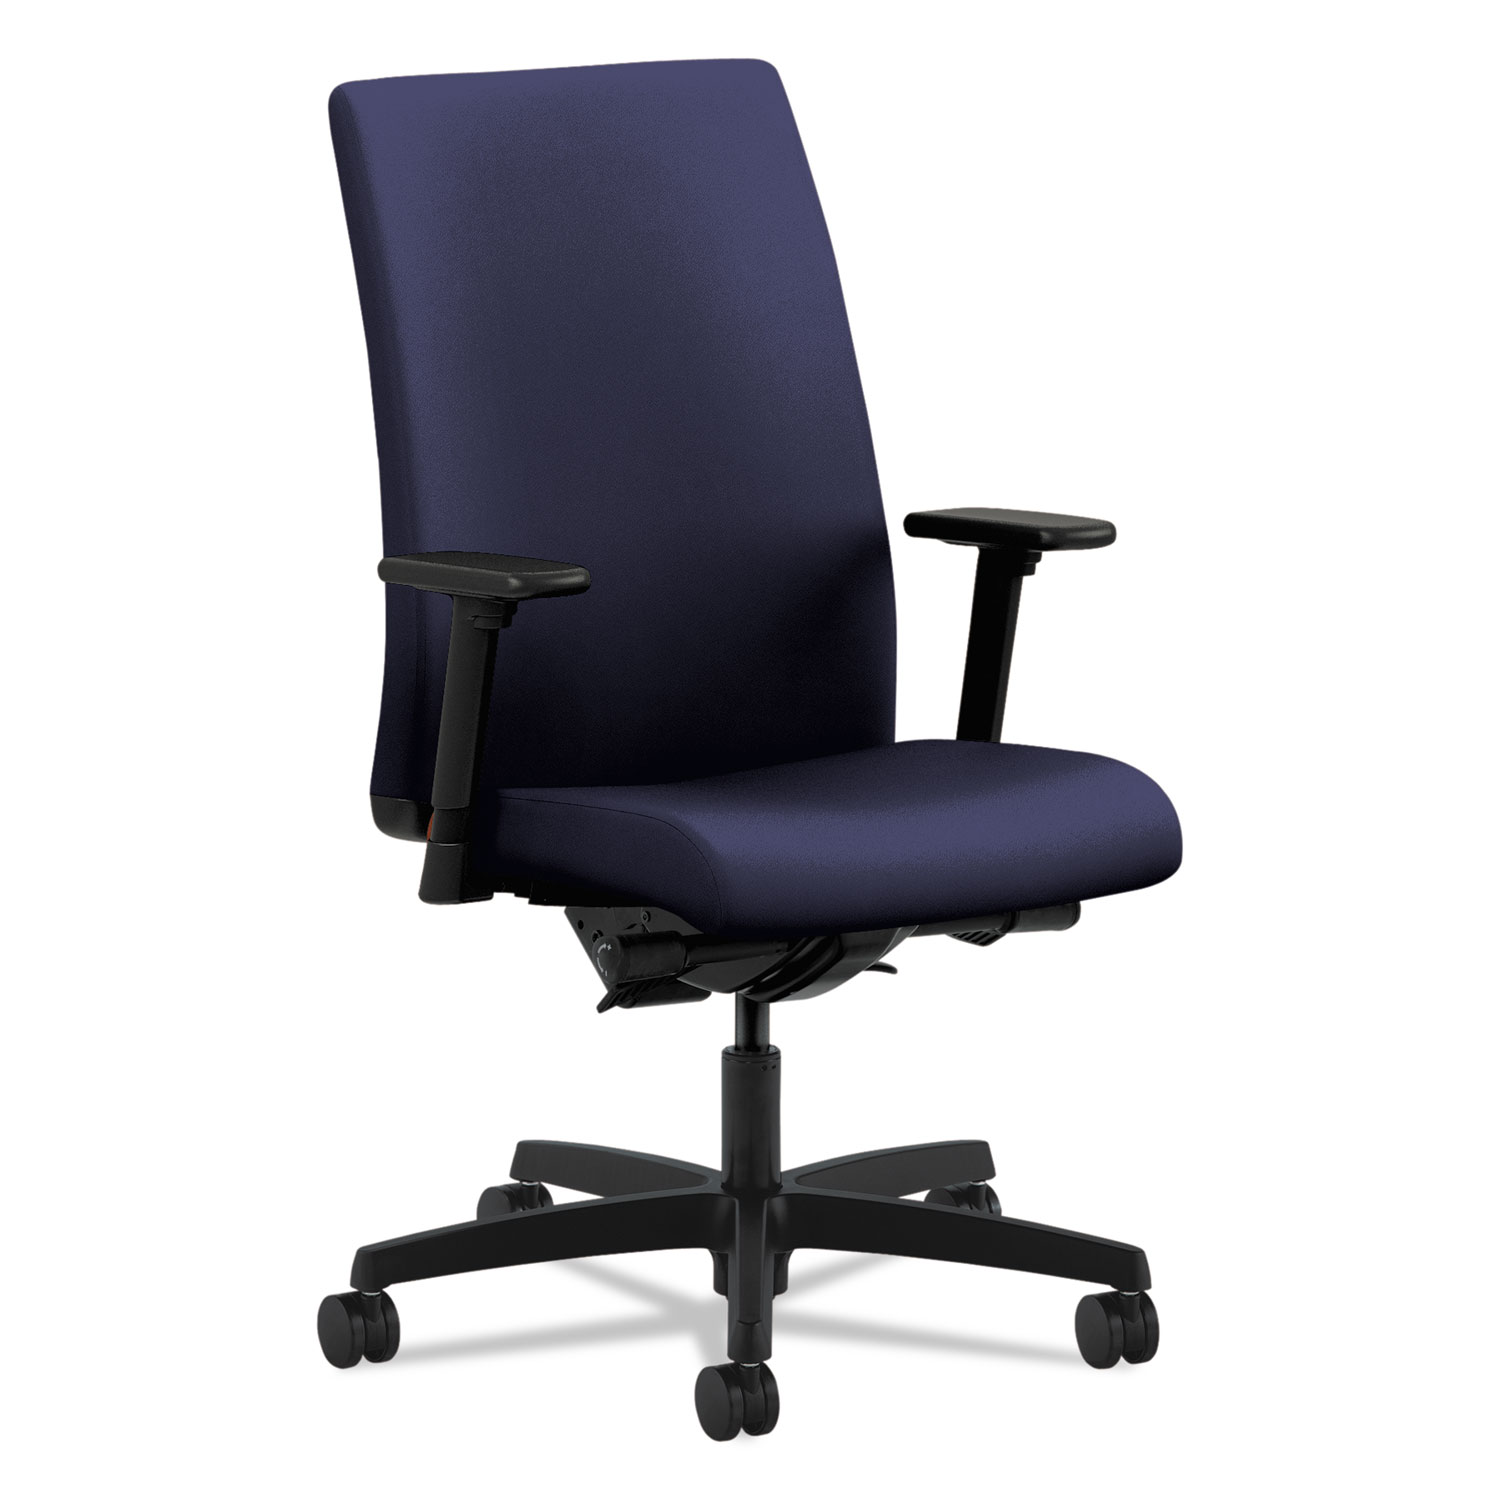  HON HIWM3.A.H.U.CU98.T.SB Ignition Series Mid-Back Work Chair, Supports up to 300 lbs., Navy Seat/Navy Back, Black Base (HONIW104CU98) 